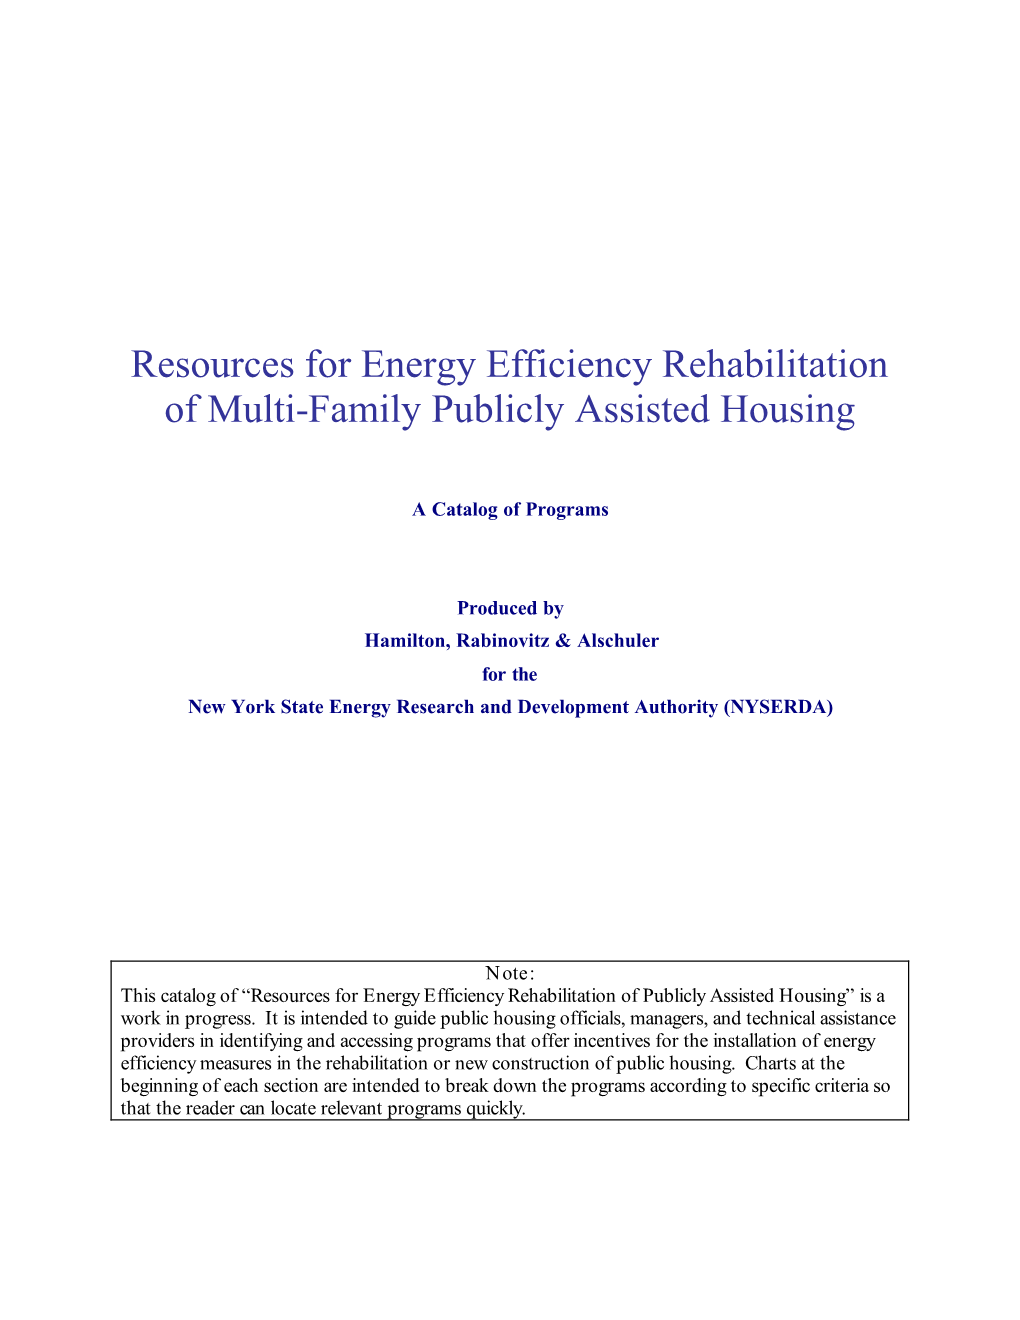 Resources for Energy Efficiency Rehabilitiation of Multifamily Public